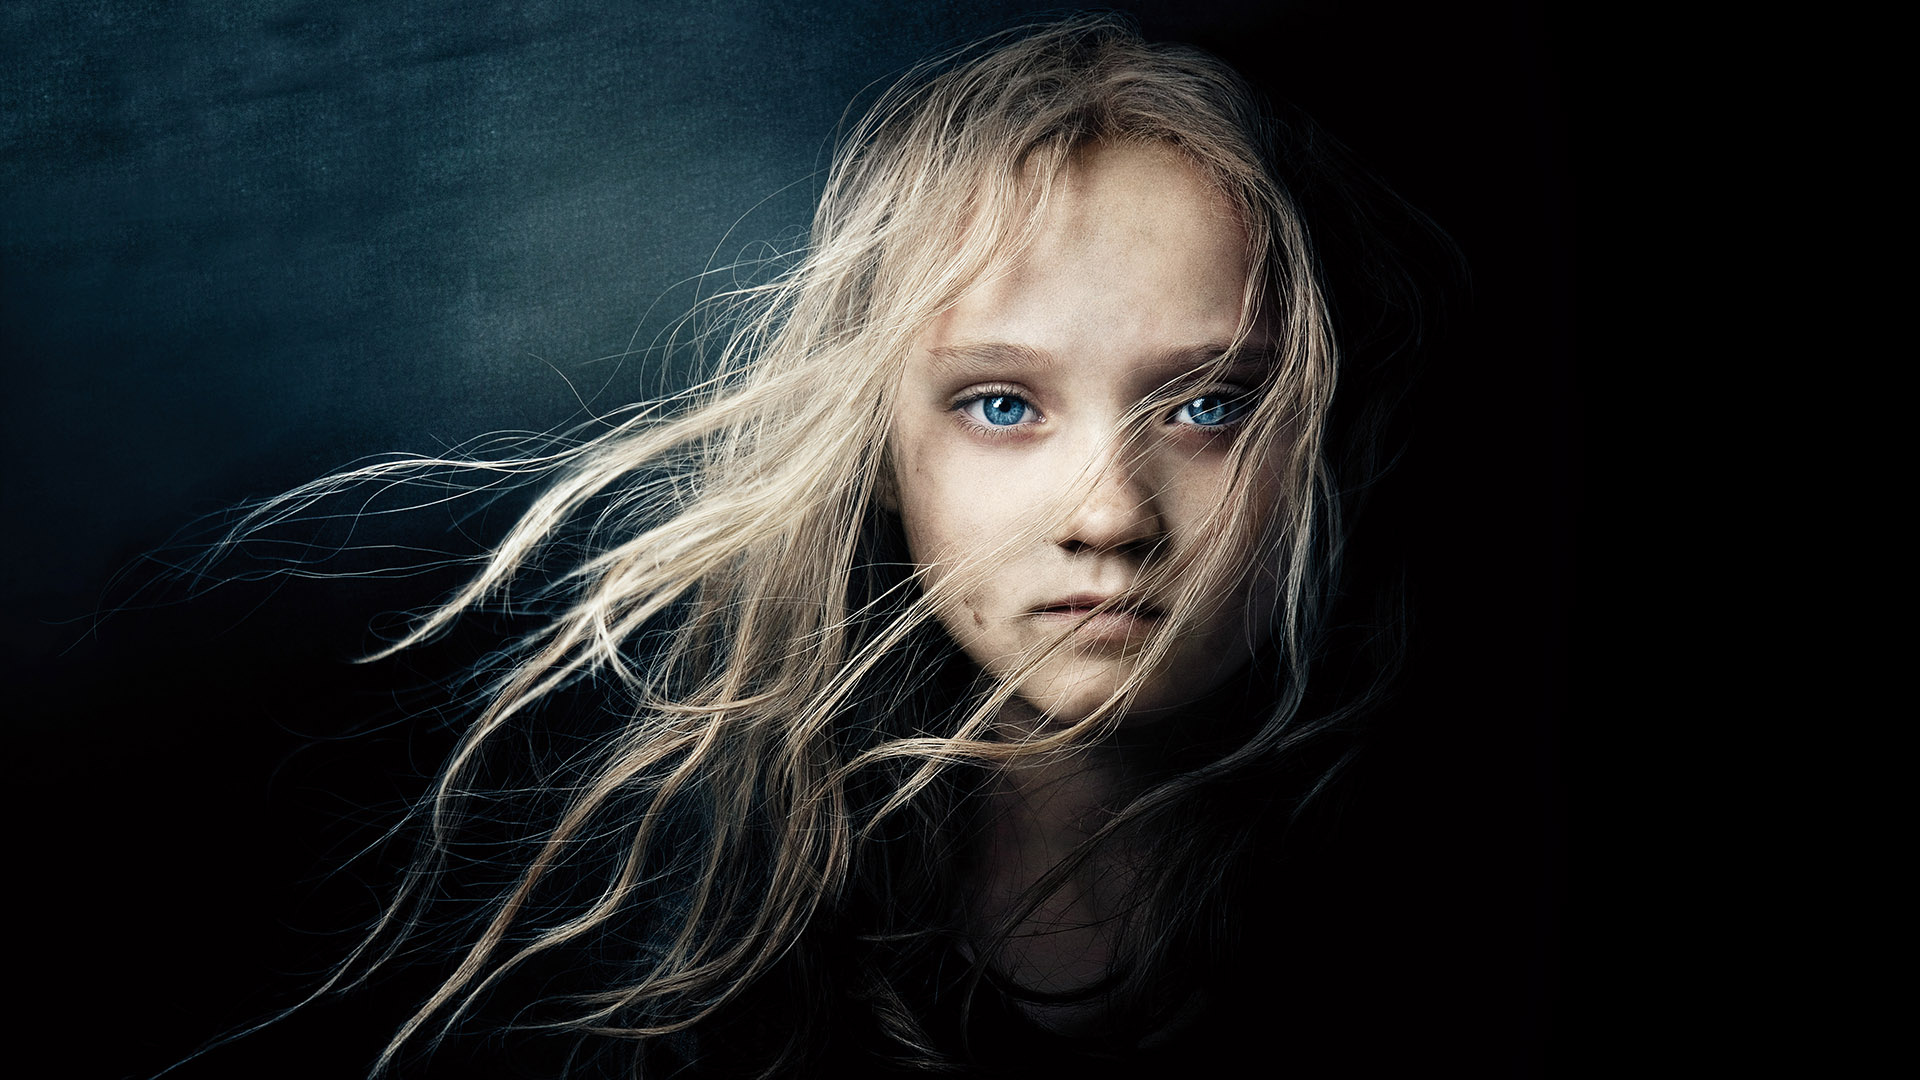 Les Miserables: The film grossed over $442 million worldwide on a budget of $61 million. 1920x1080 Full HD Background.